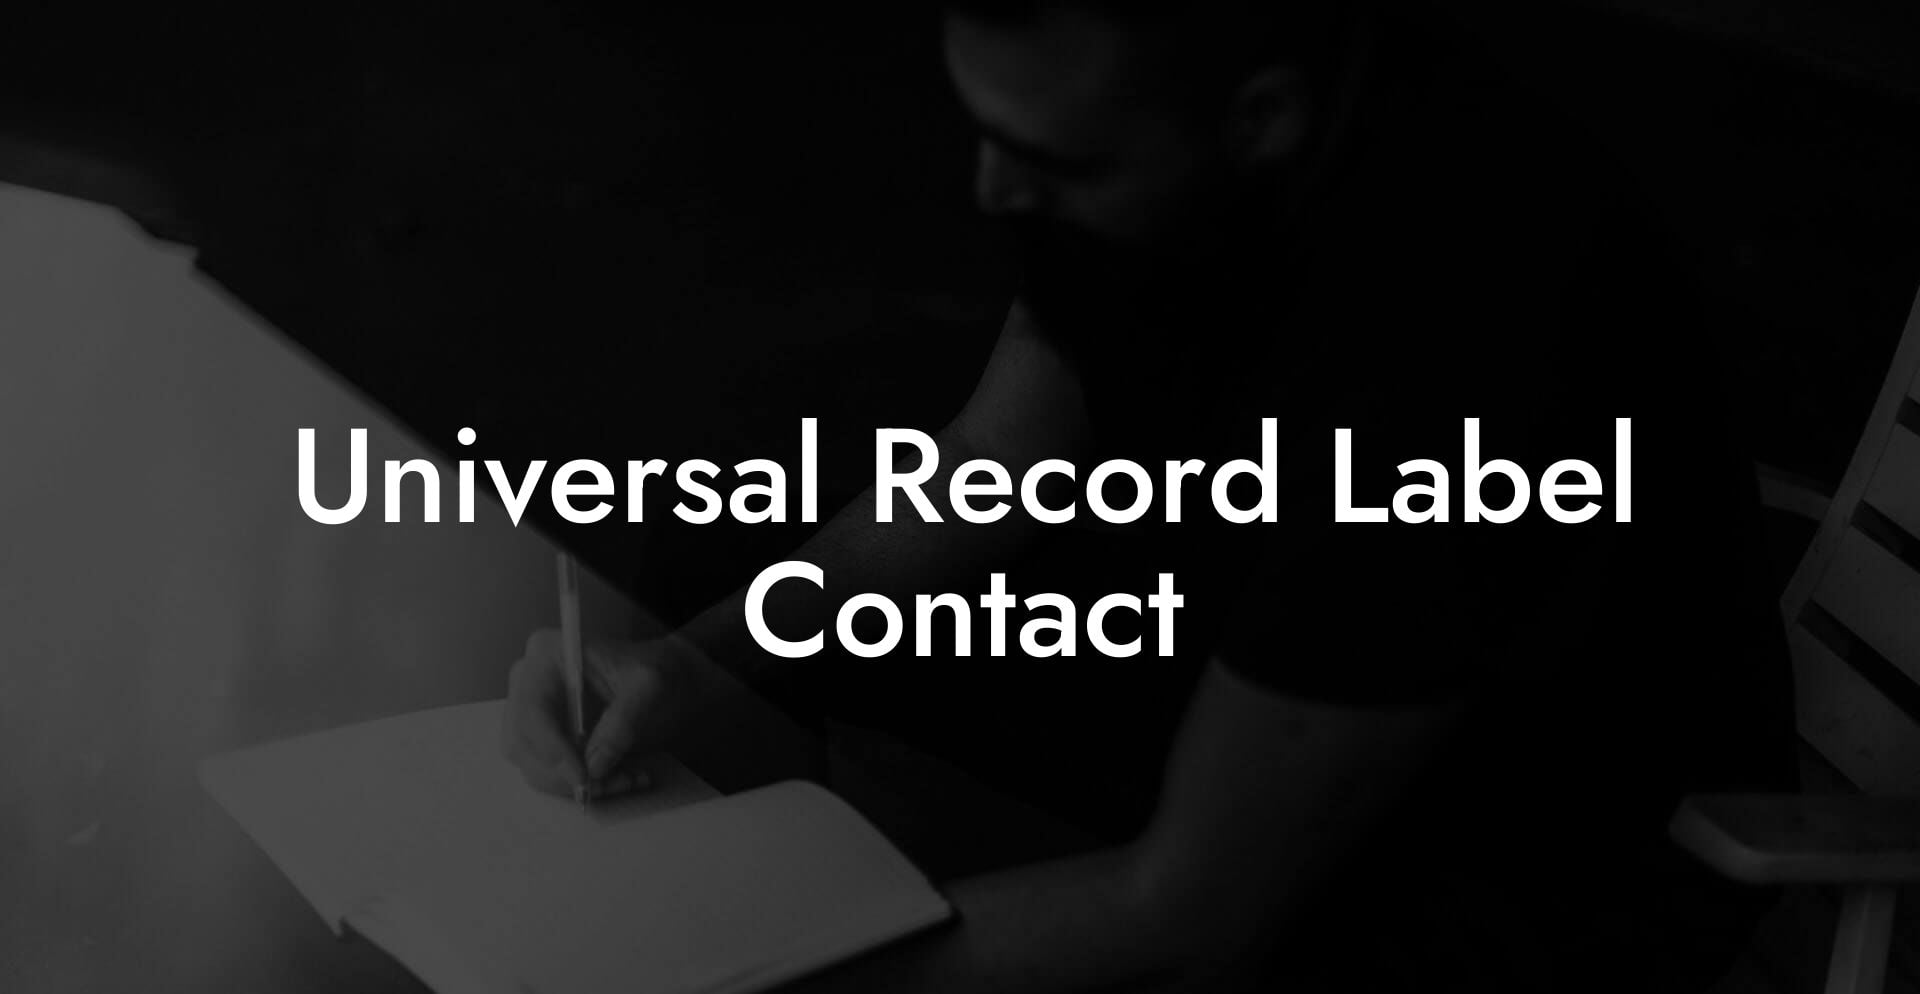 Universal Record Label Contact